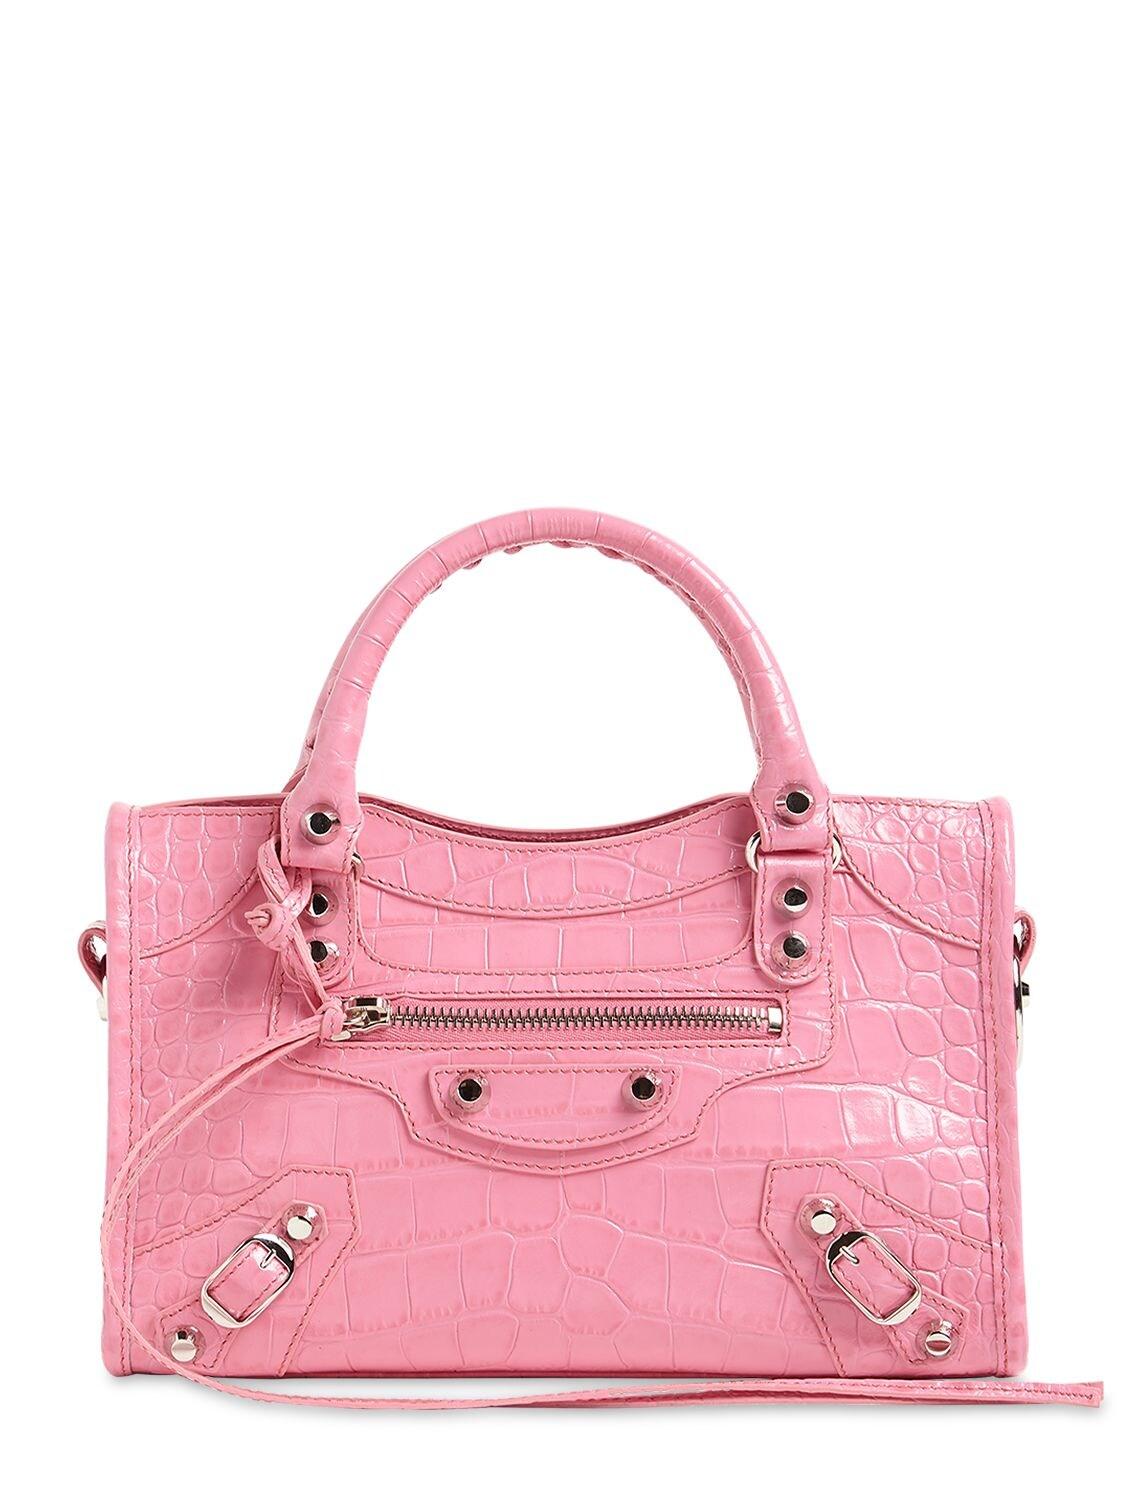 Balenciaga Classic City Mini Croc-embossed Leather Shoulder Bag in Pink Lyst